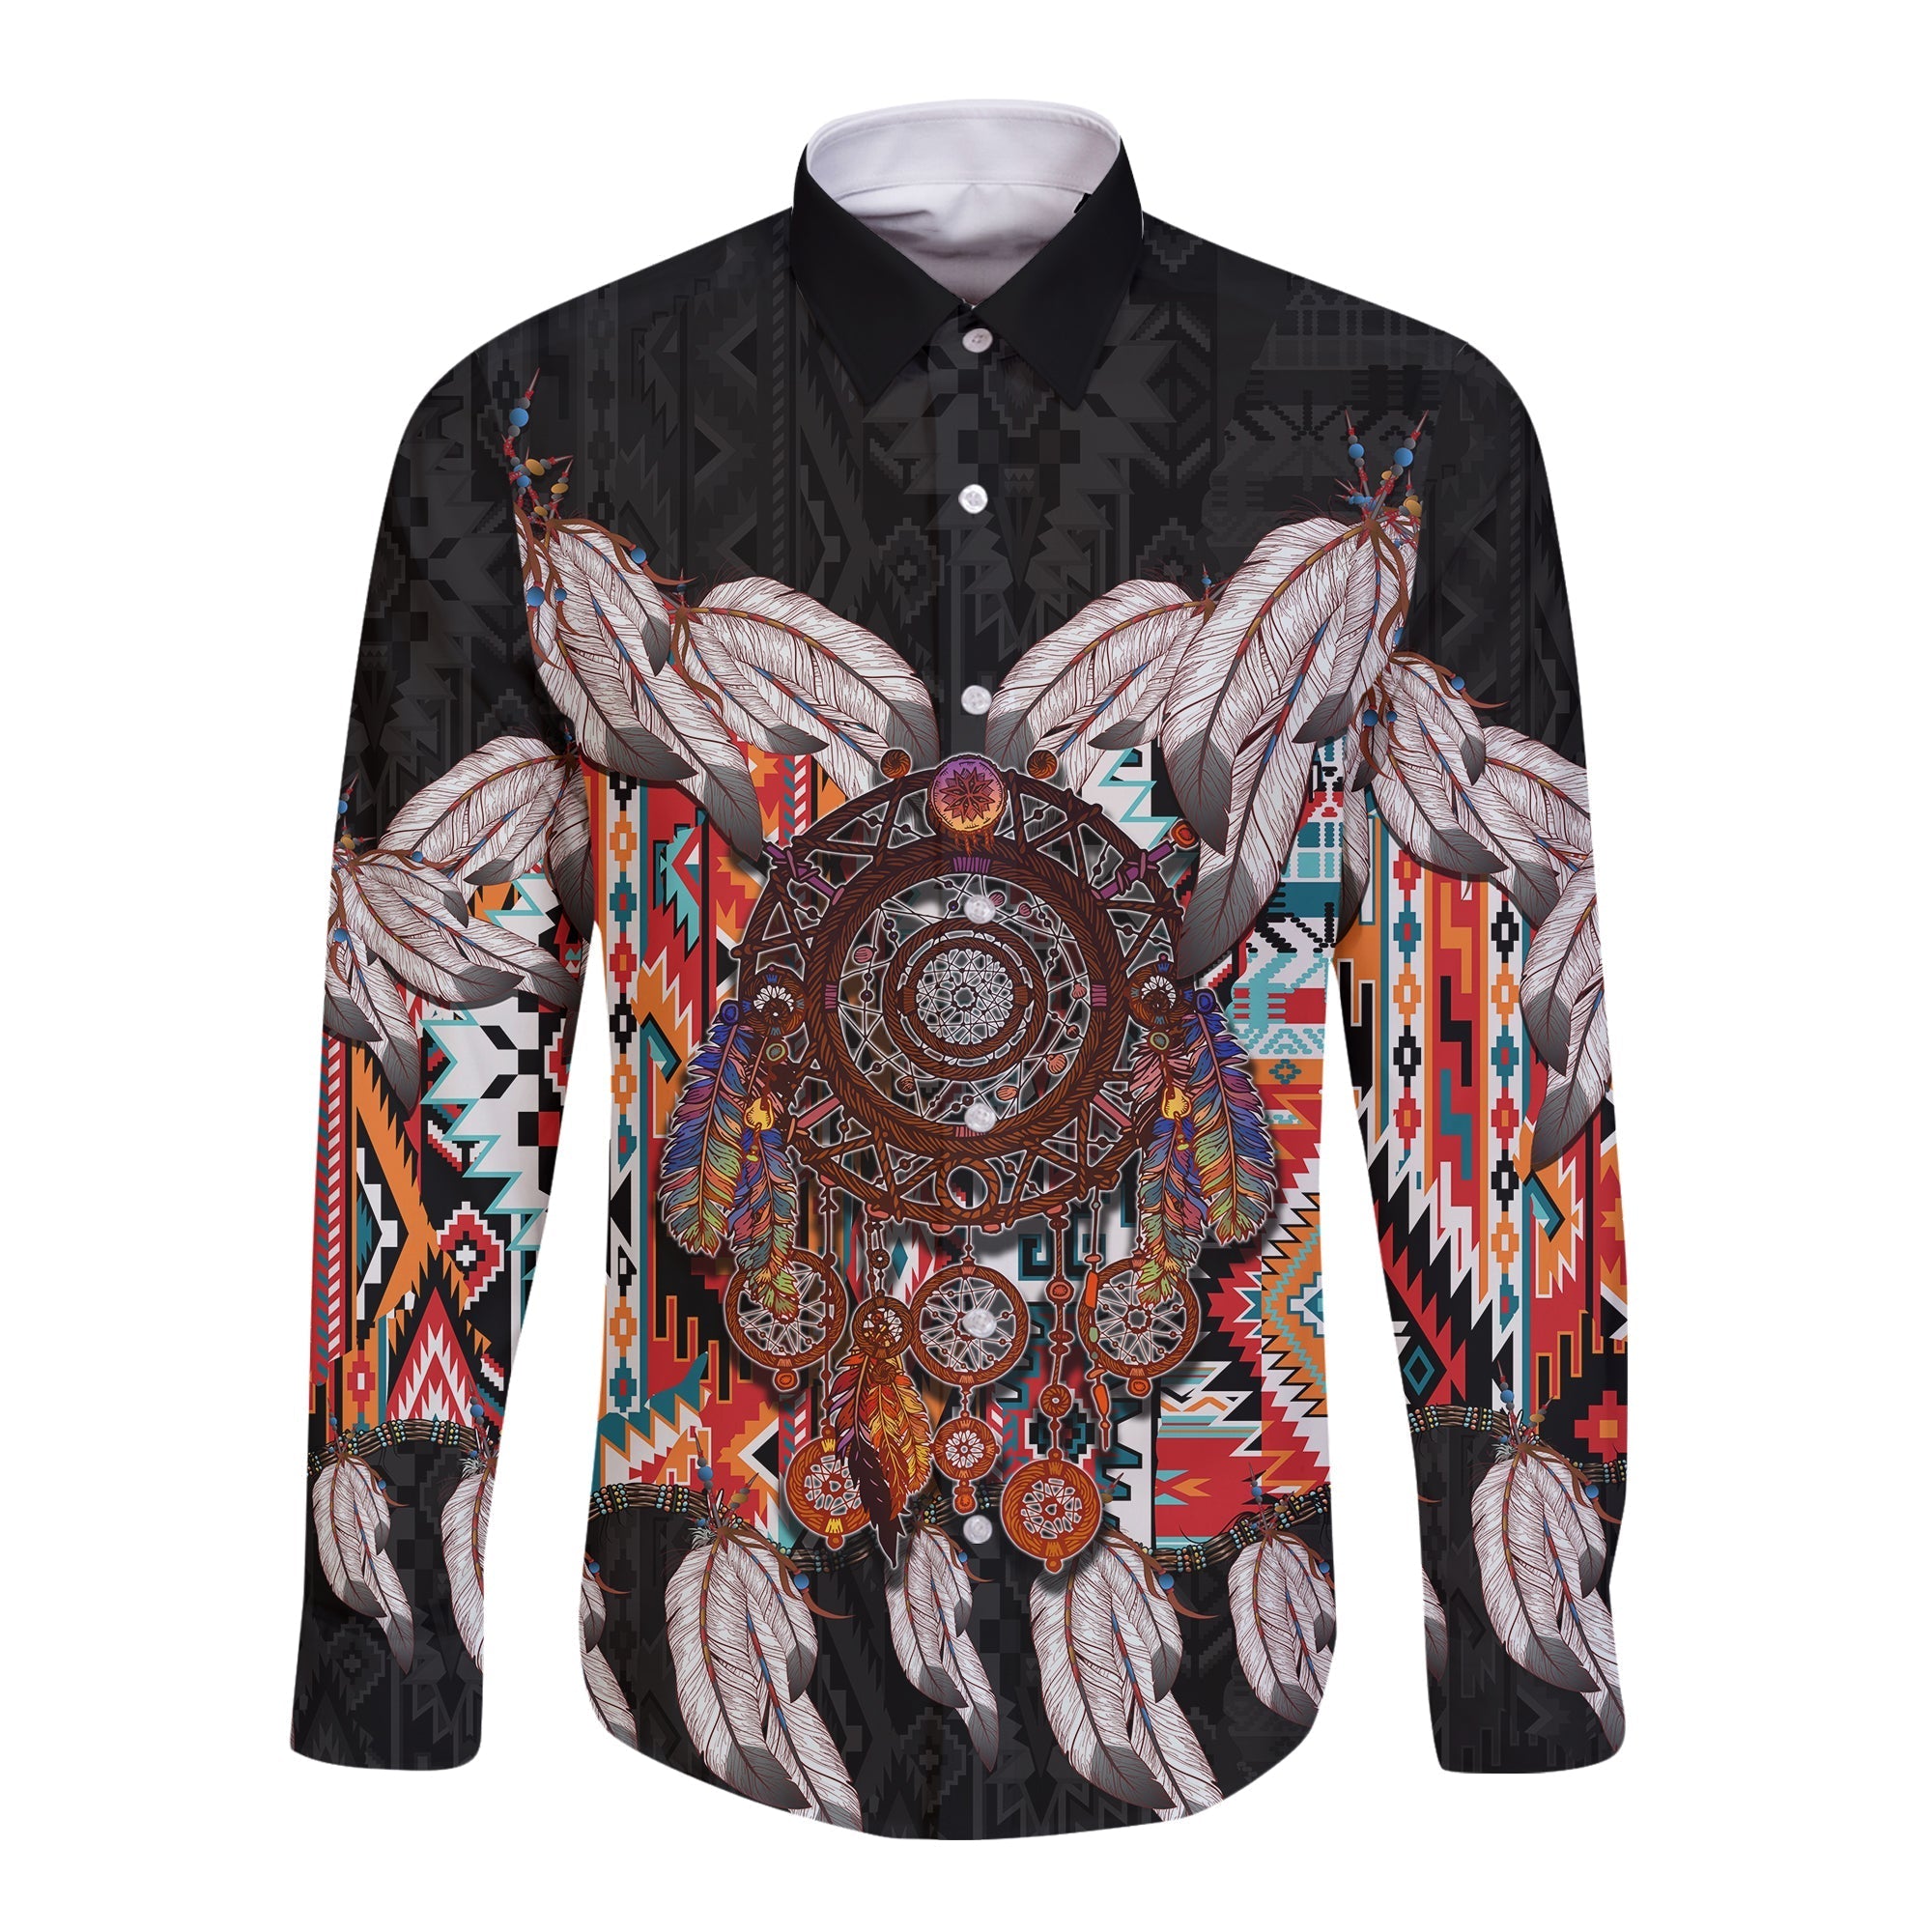 custom-personalised-native-american-long-sleeve-button-shirt-native-patterns-dreamcatcher